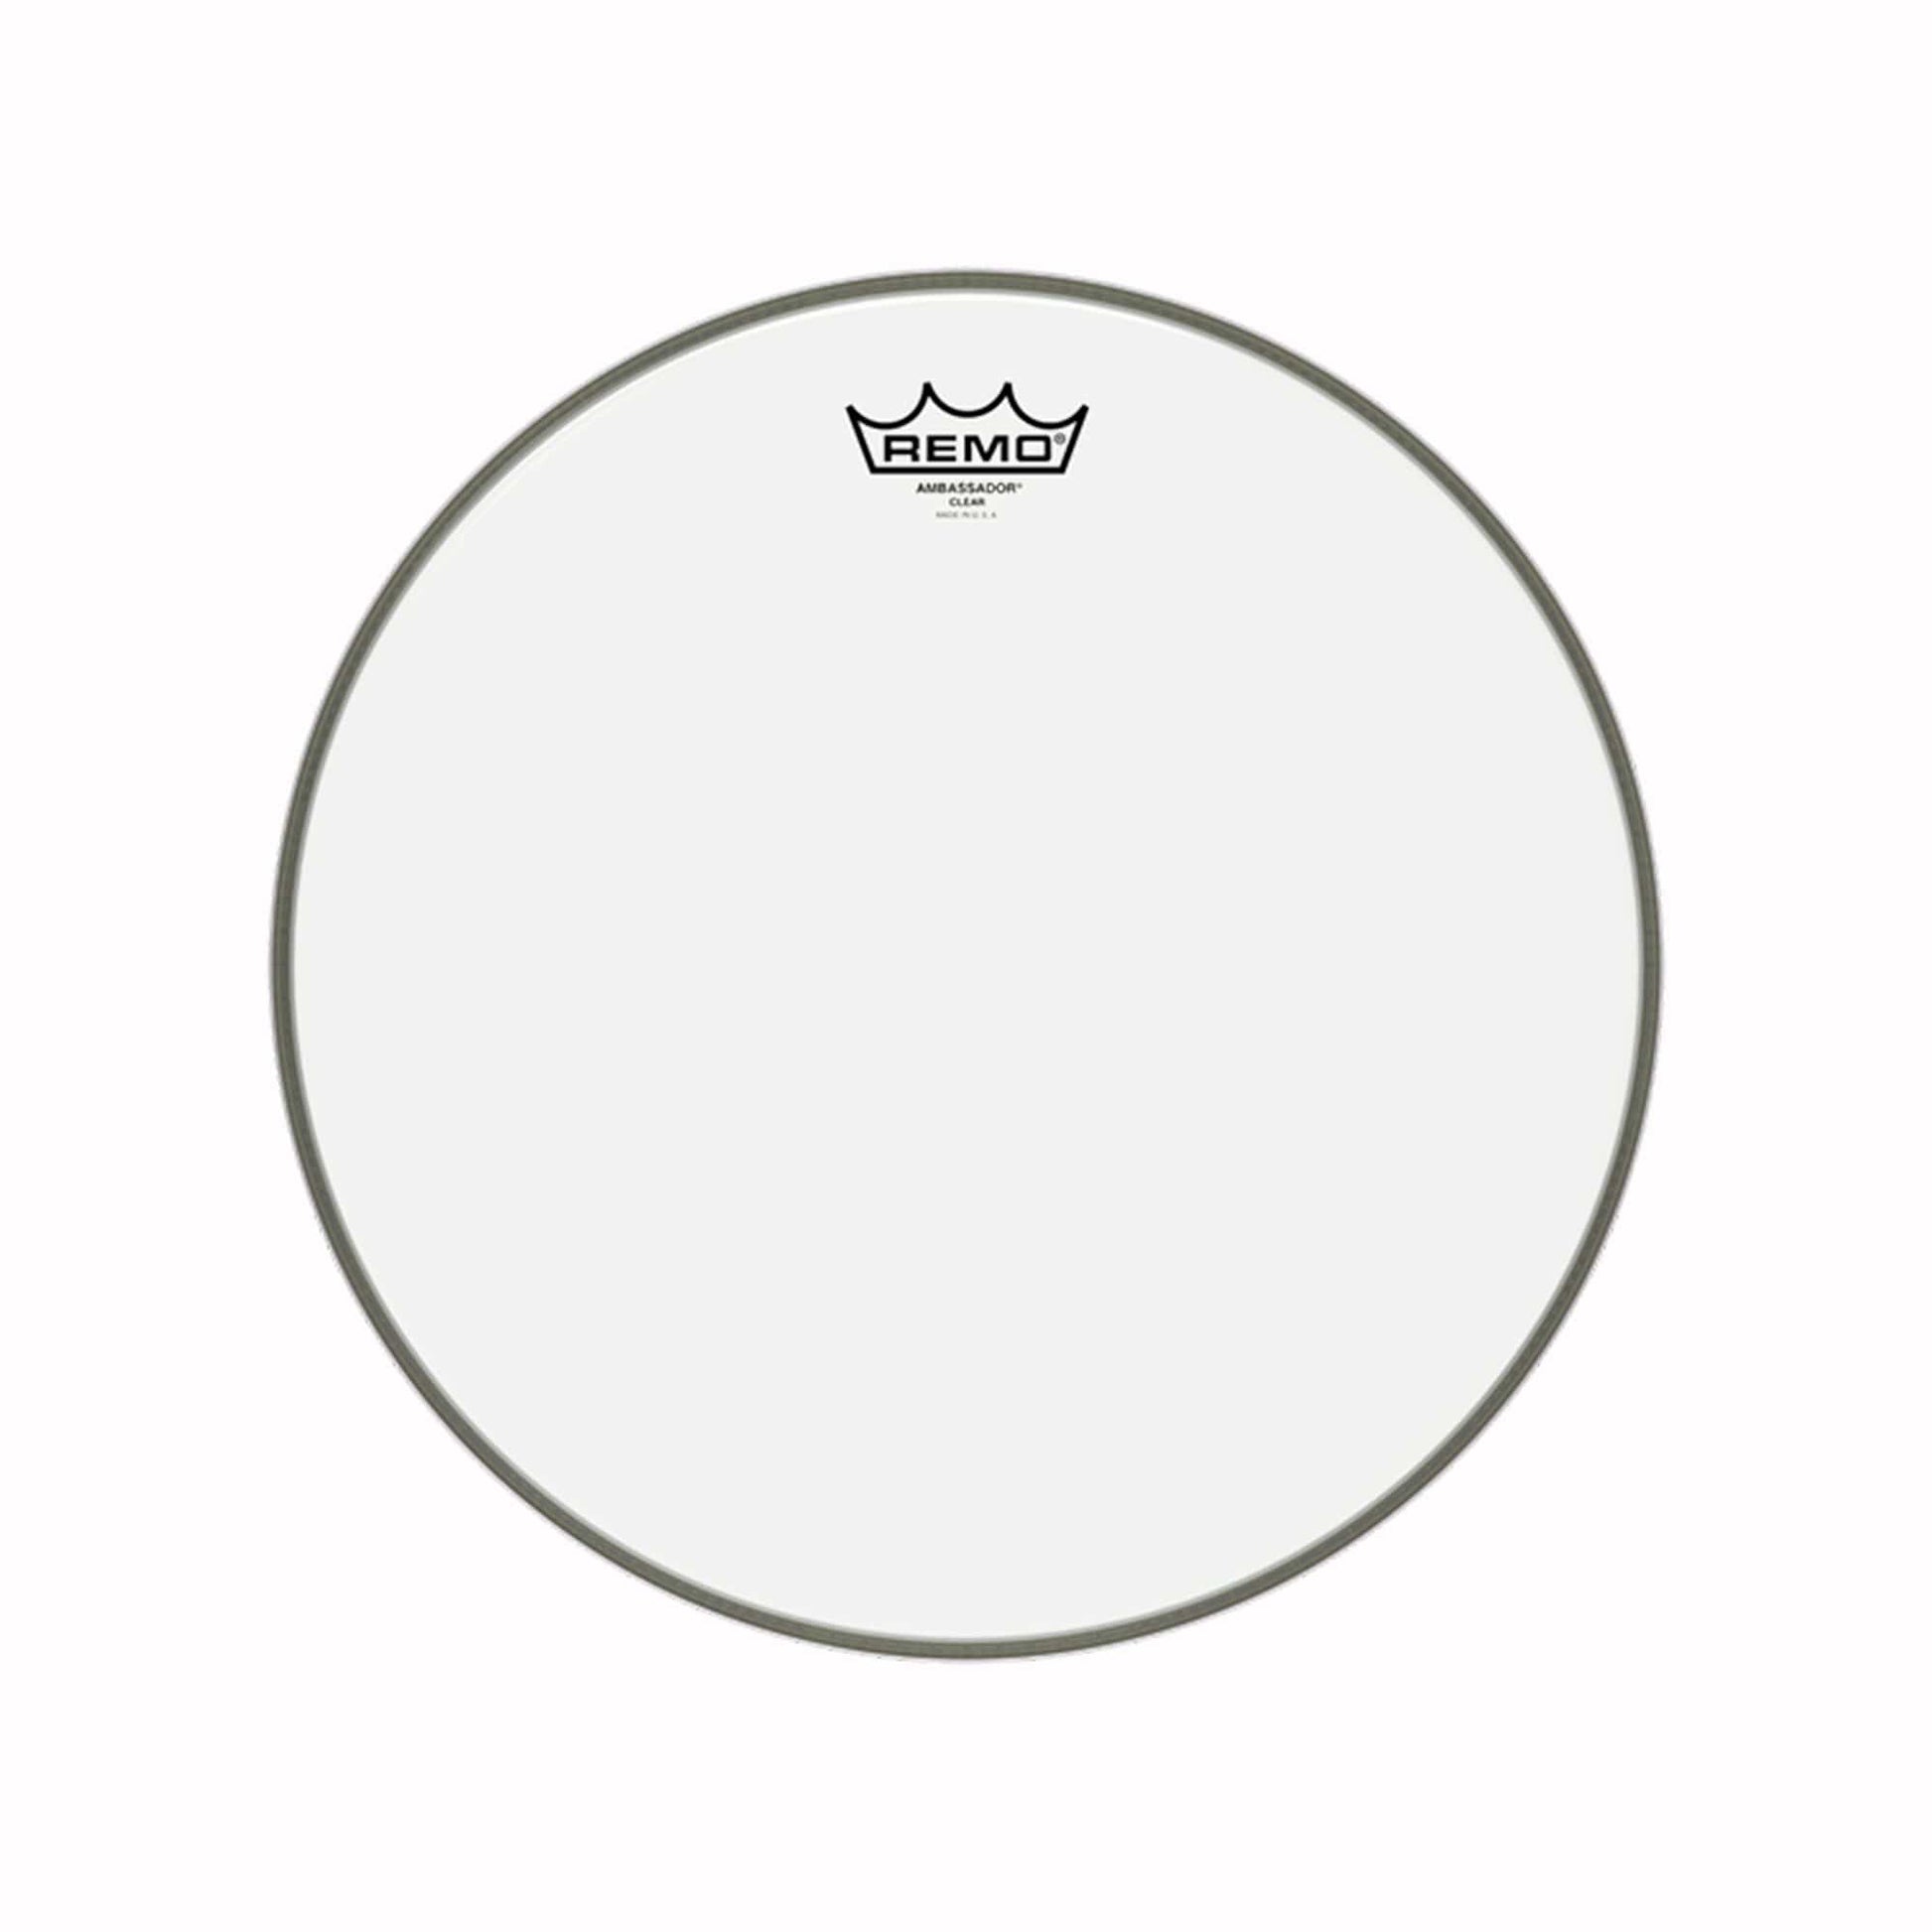 Remo 12" Ambassador Clear Drumhead Drums and Percussion / Parts and Accessories / Heads